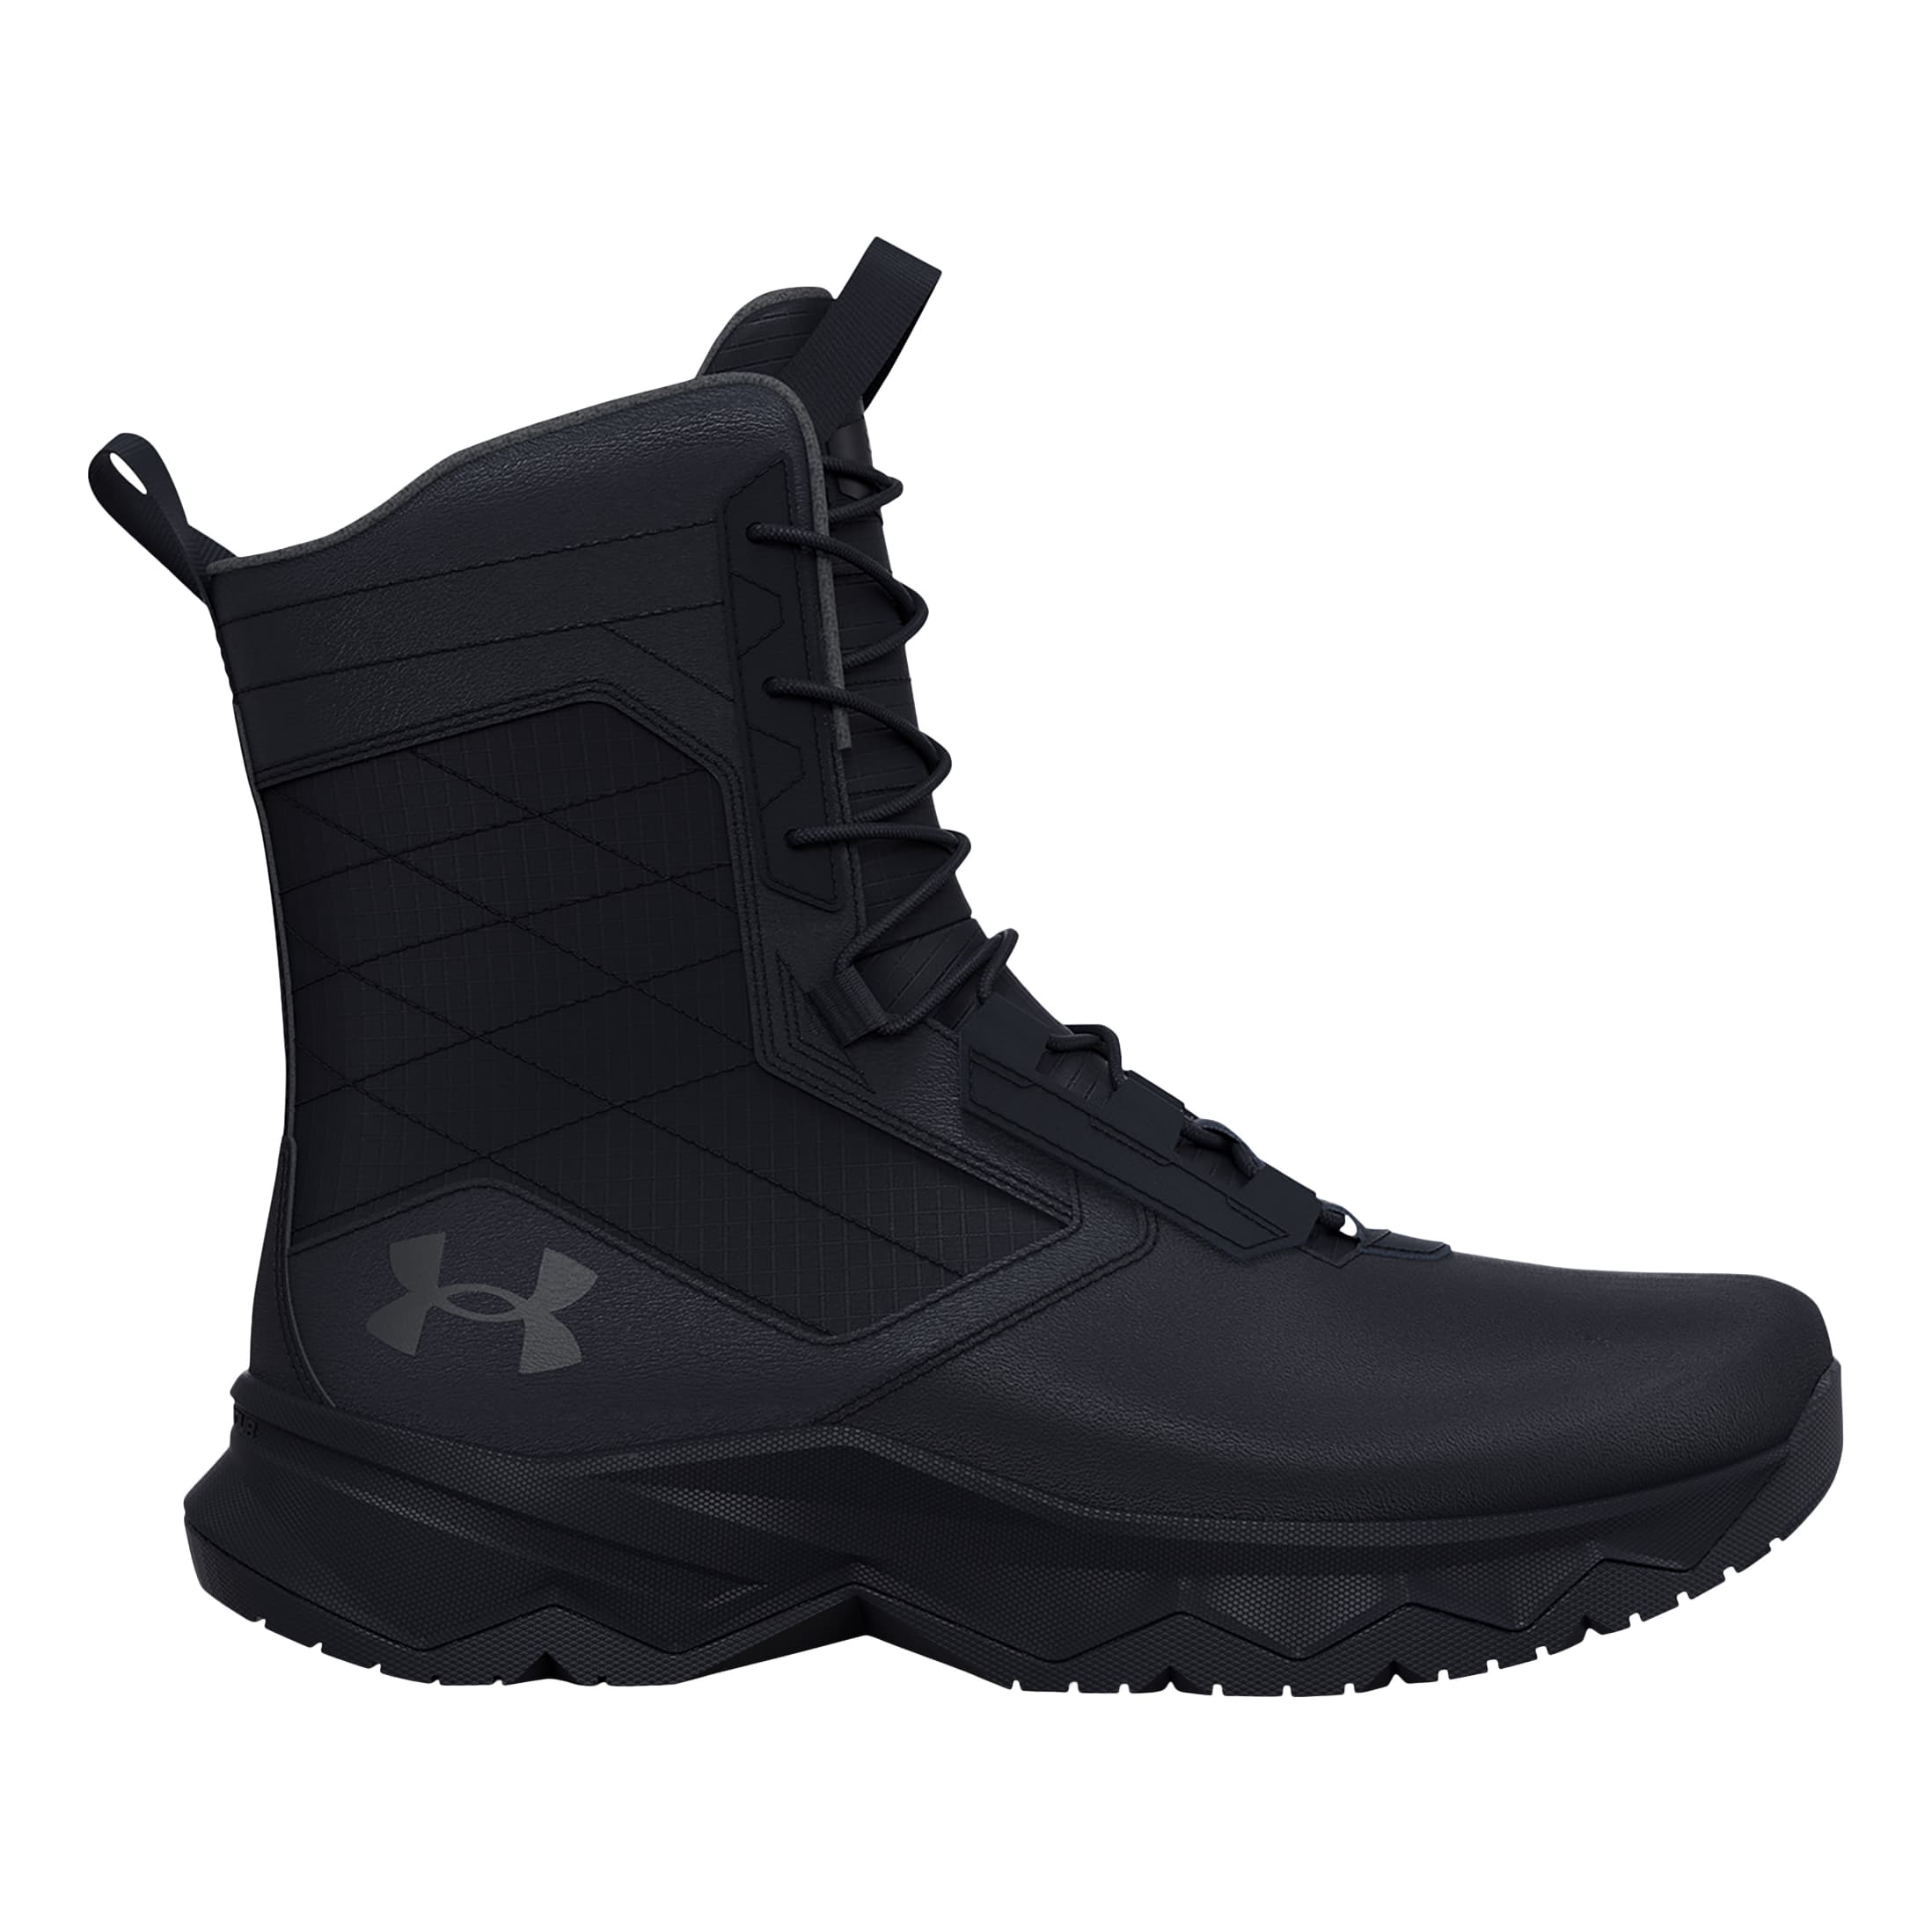 The Under Armour Project Rock x HOVR Dawn Is Built Tough For